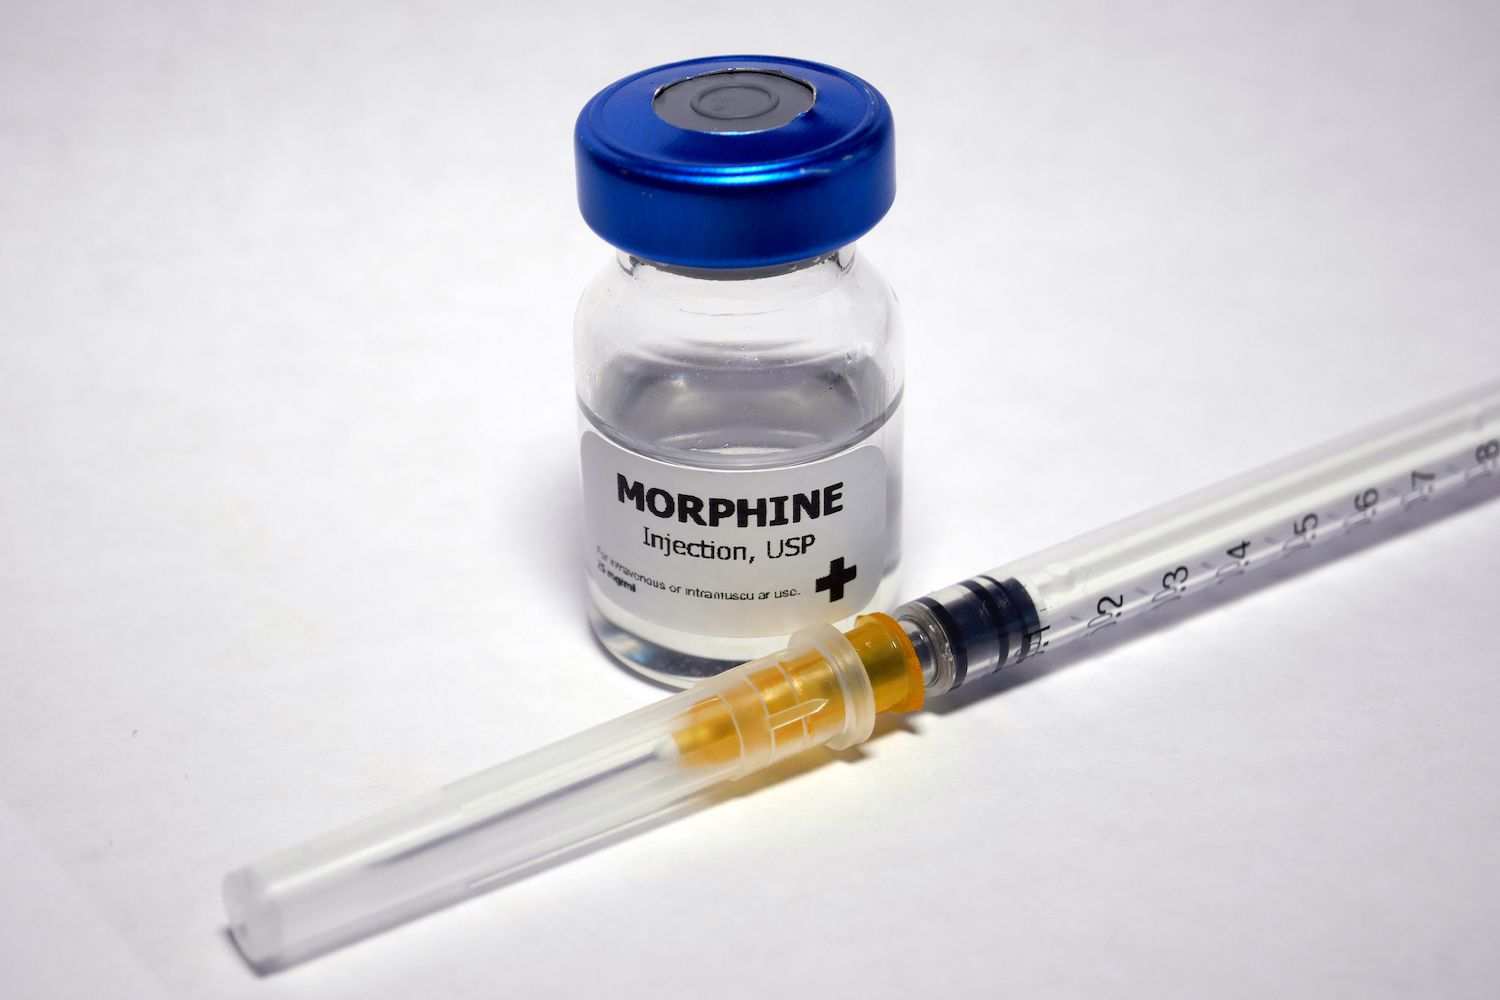 18-interesting-facts-about-morphine